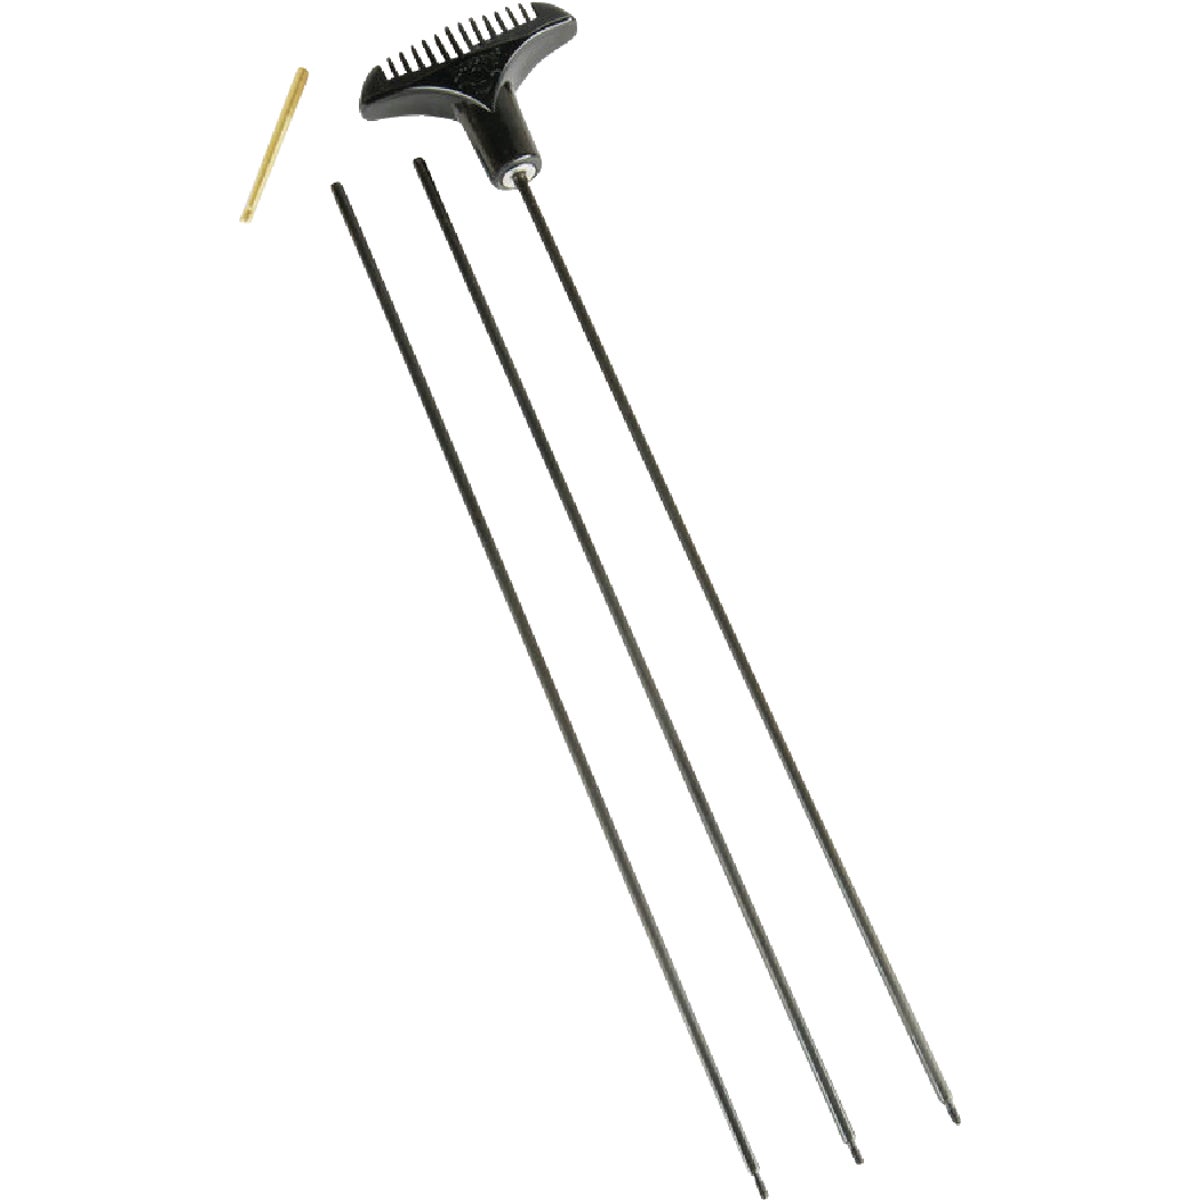 22CAL RIFLE CLEANING ROD